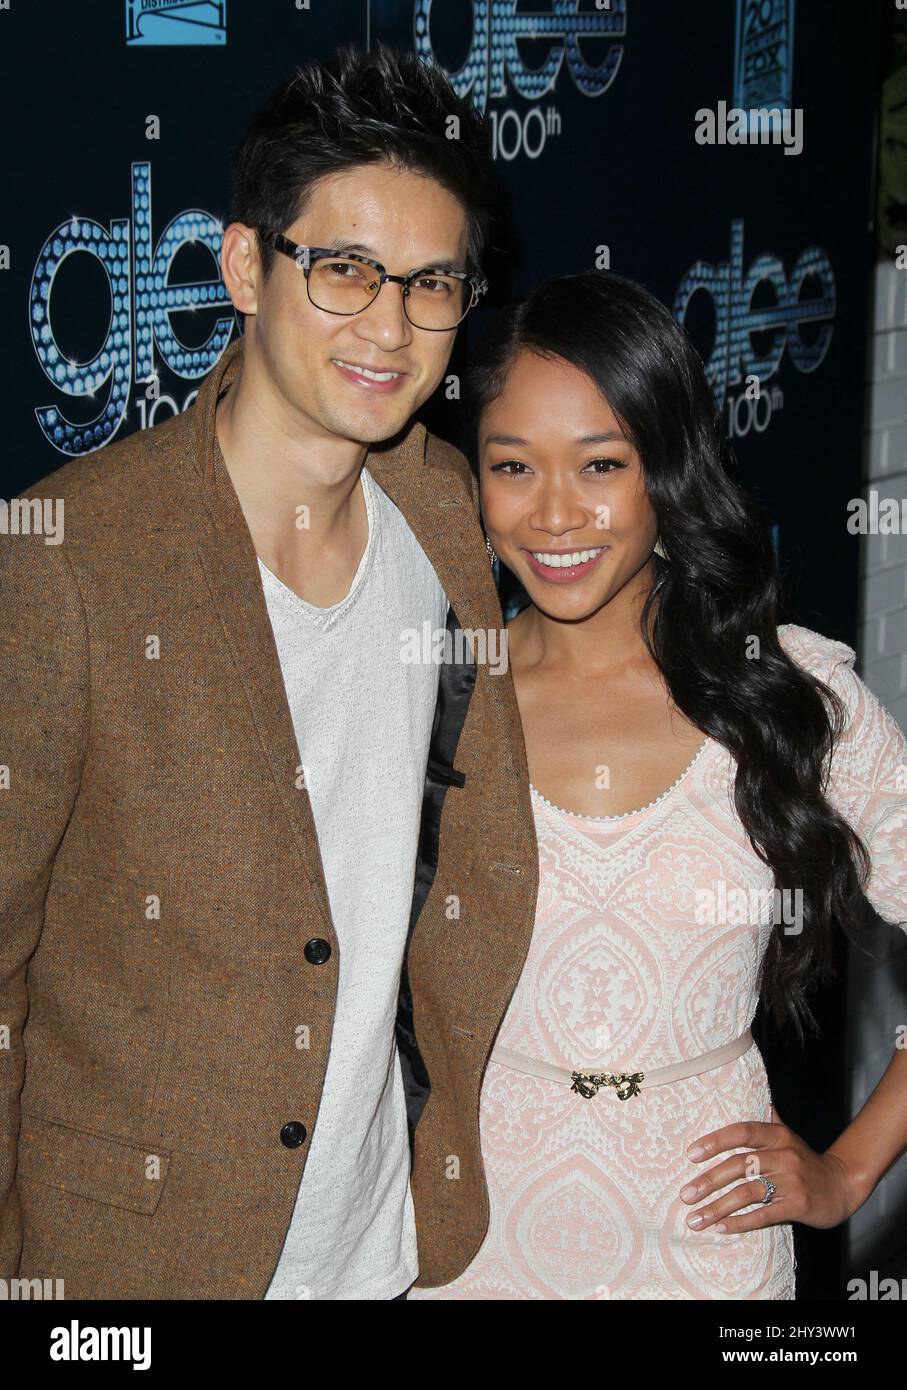 Harry Shum Jr. and Shelby Rabara arriving for the 100th Episode Celebration  of Glee held at the Chateau Marmont, Hollywood, Los Angeles Stock Photo -  Alamy